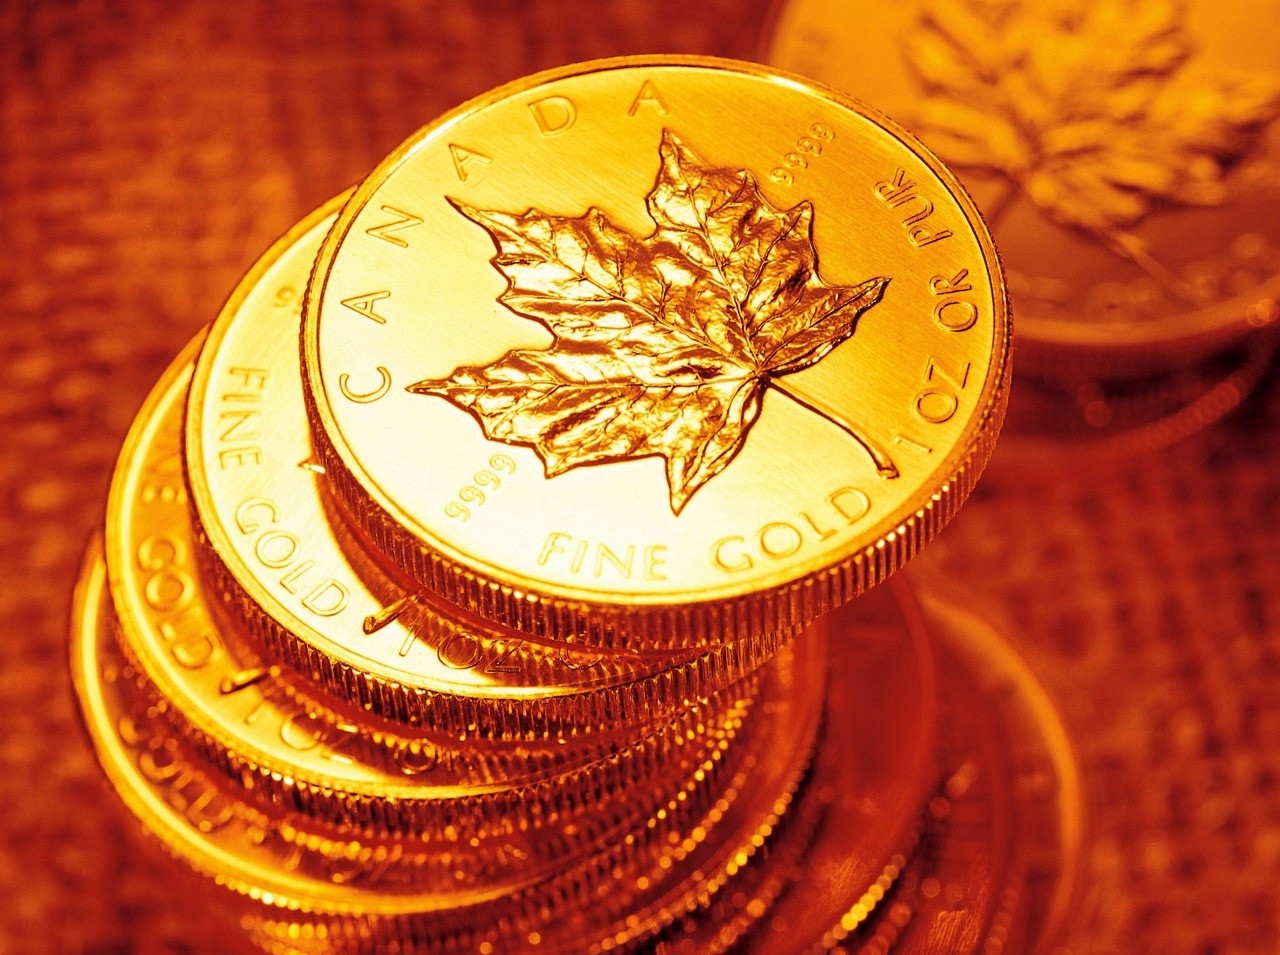 Gold Coins Wallpaper | World Coins Collecting